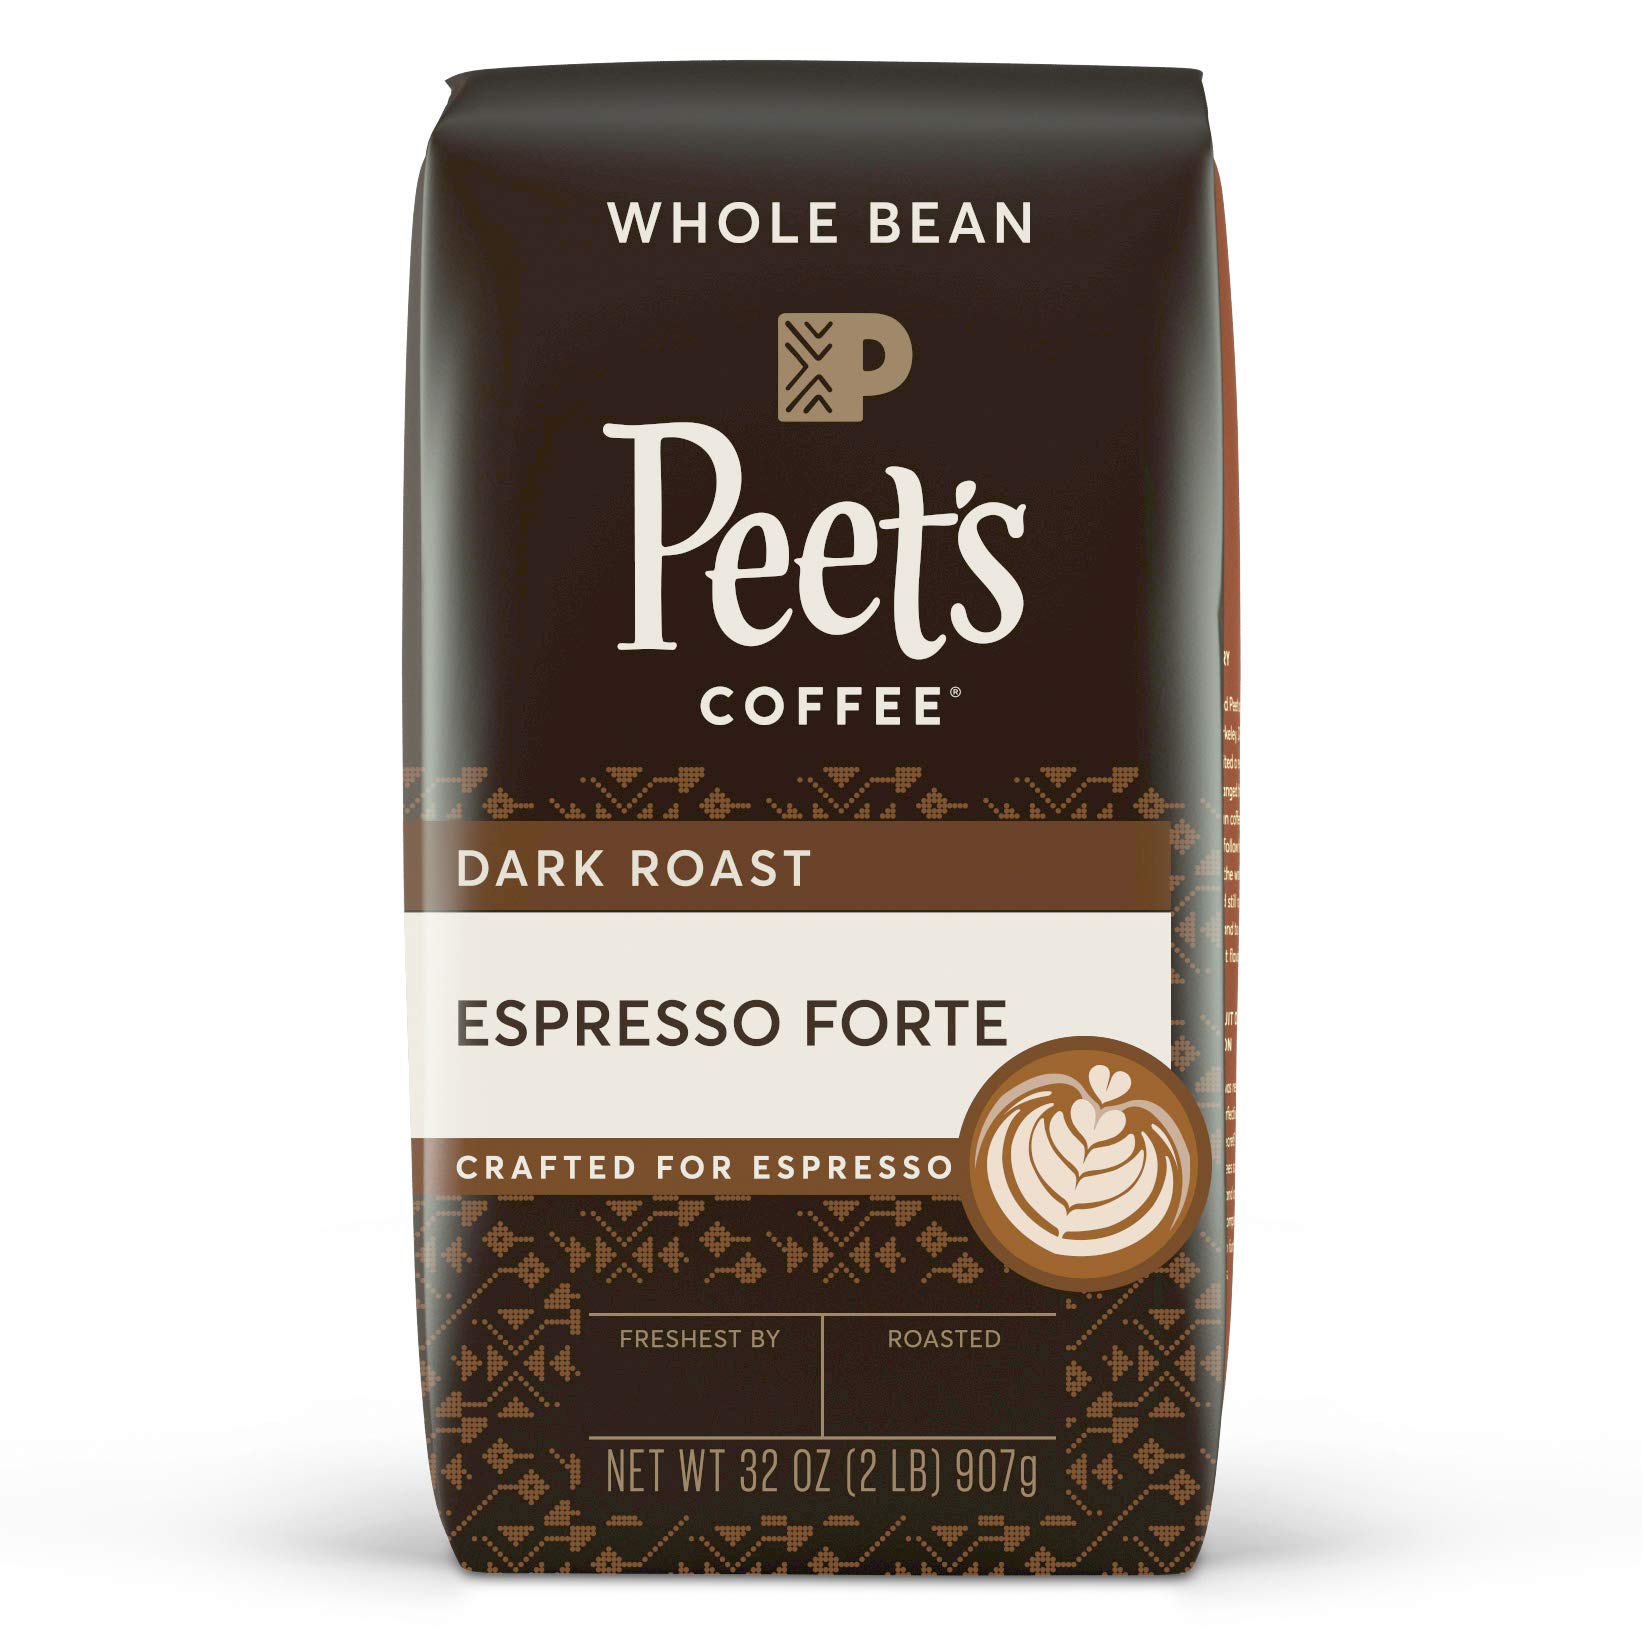 Peets espresso forte 32oz amazon $11.19 after 5% S&S and 25% coup YMMV